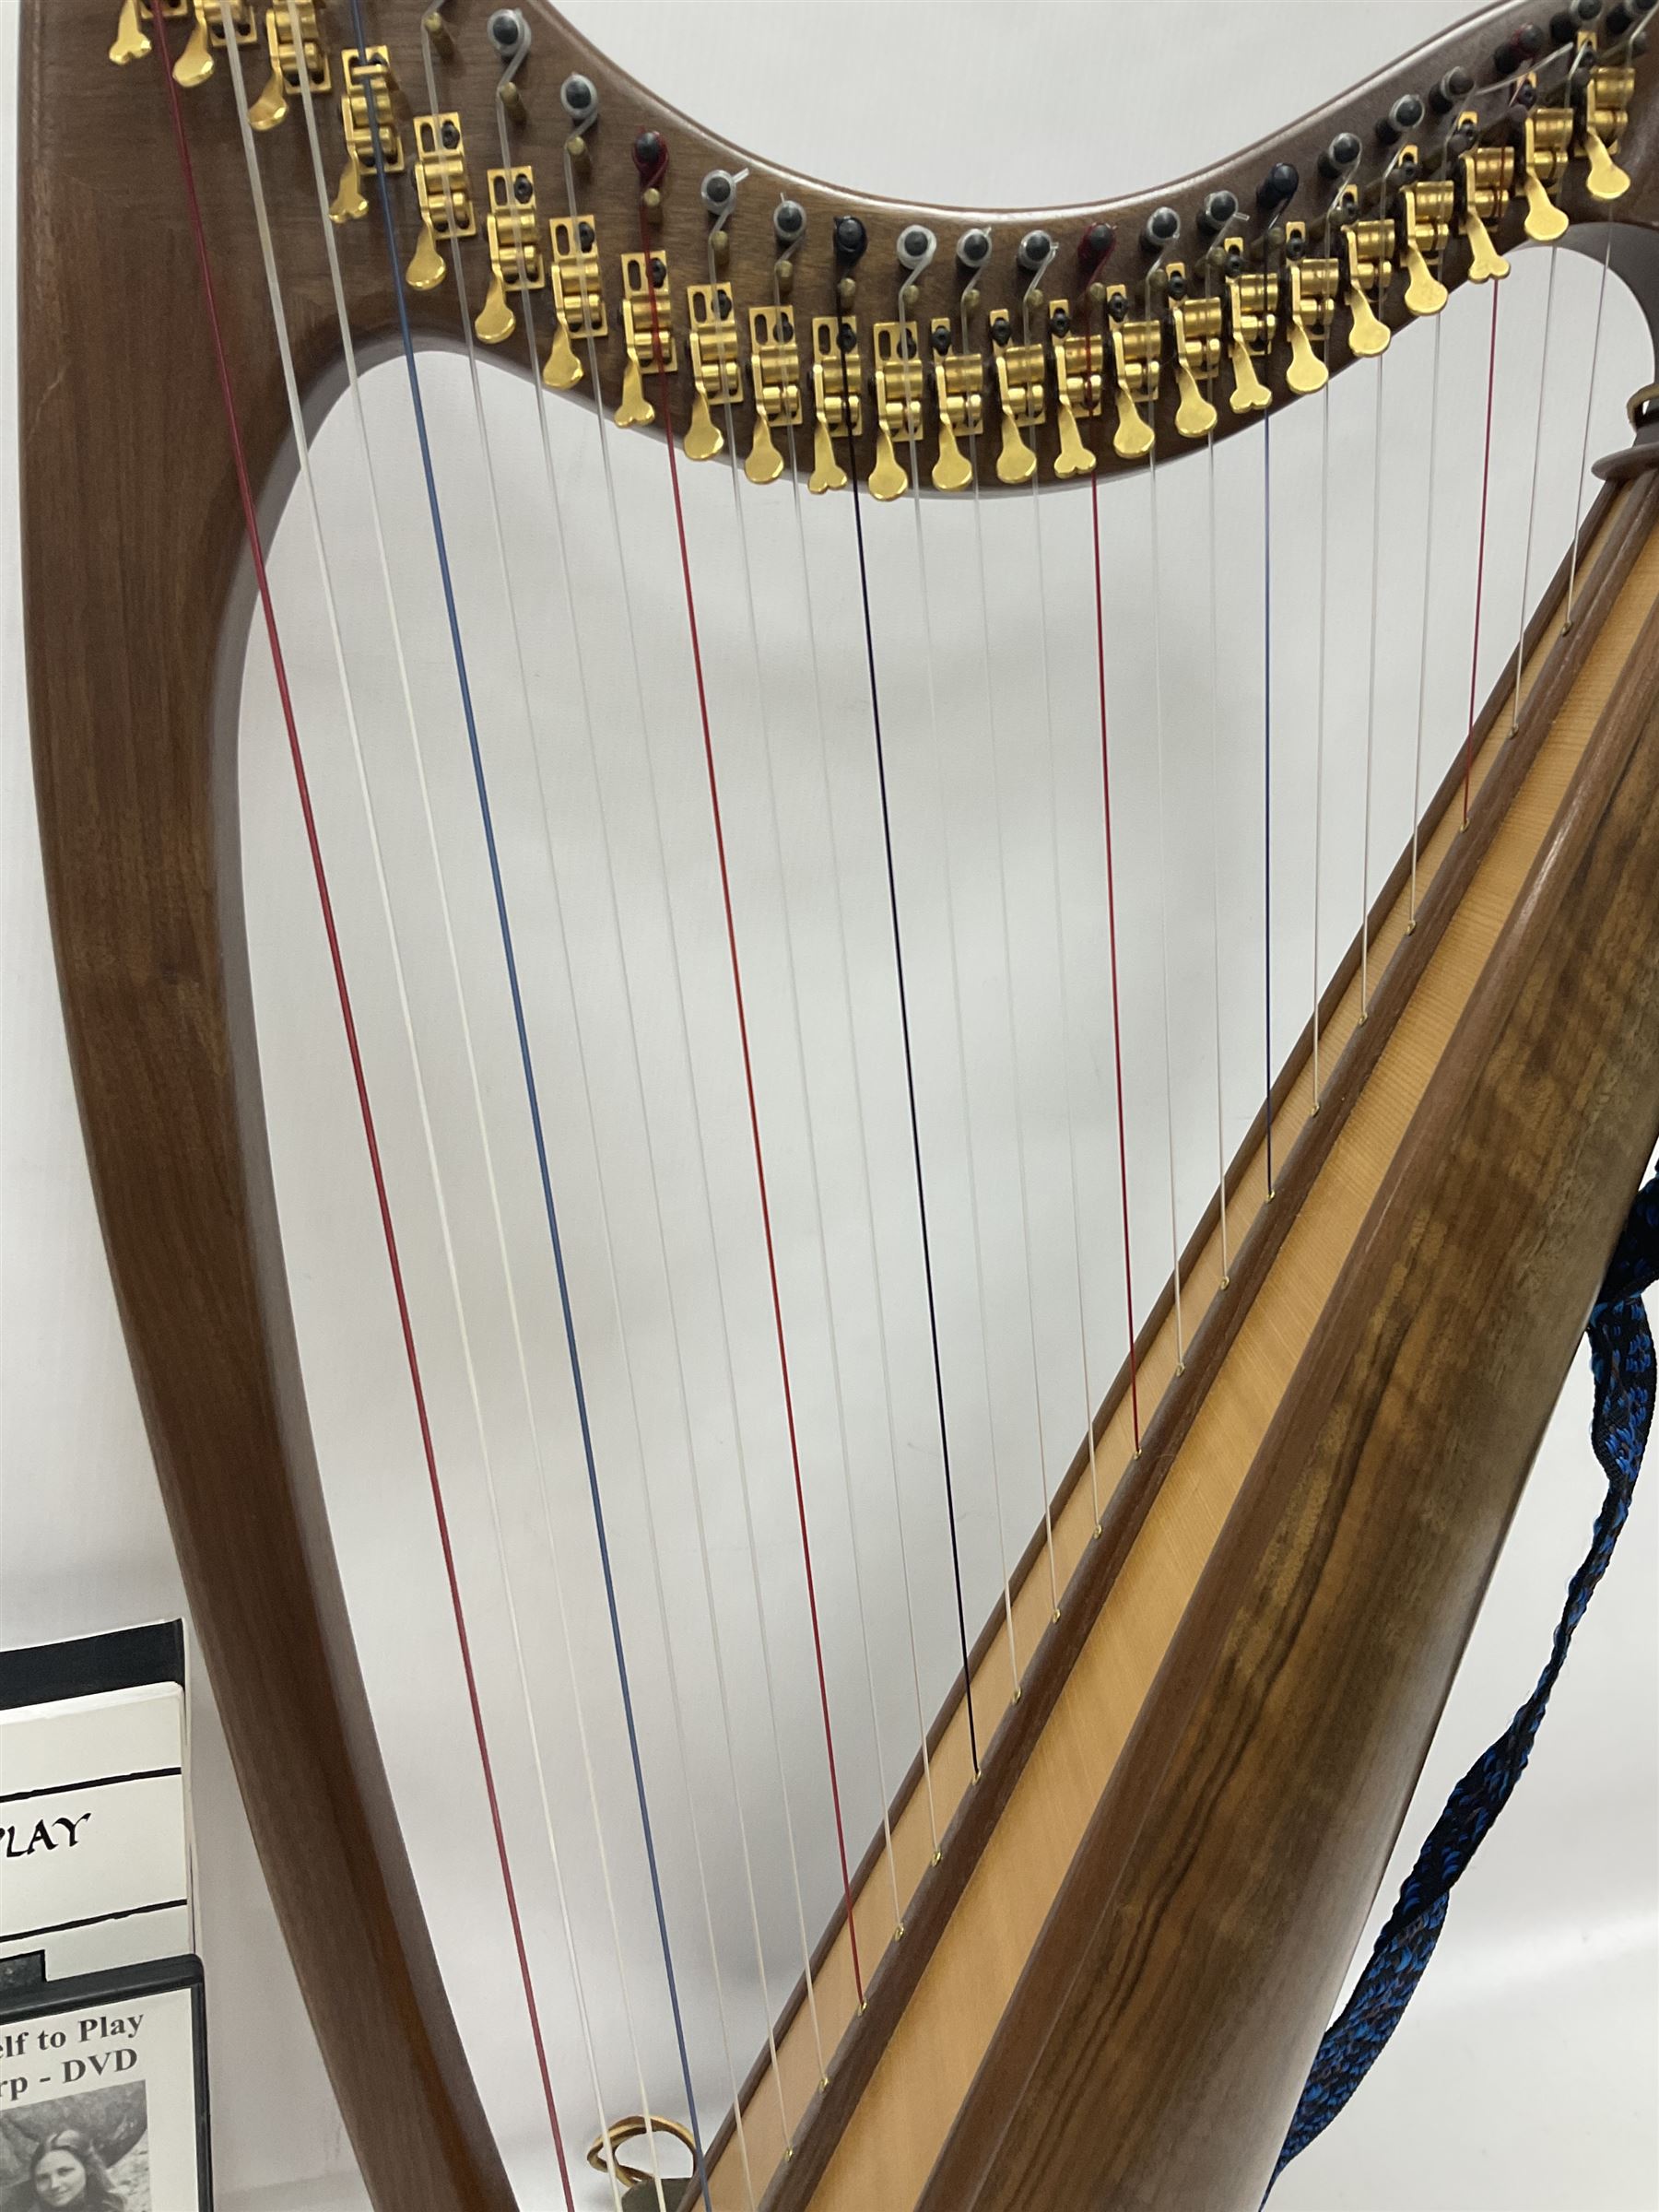 Contemporary 24 string Celtic or Irish Folk Harp with an Ash soundboard and 24 sharpening keys - Image 7 of 15